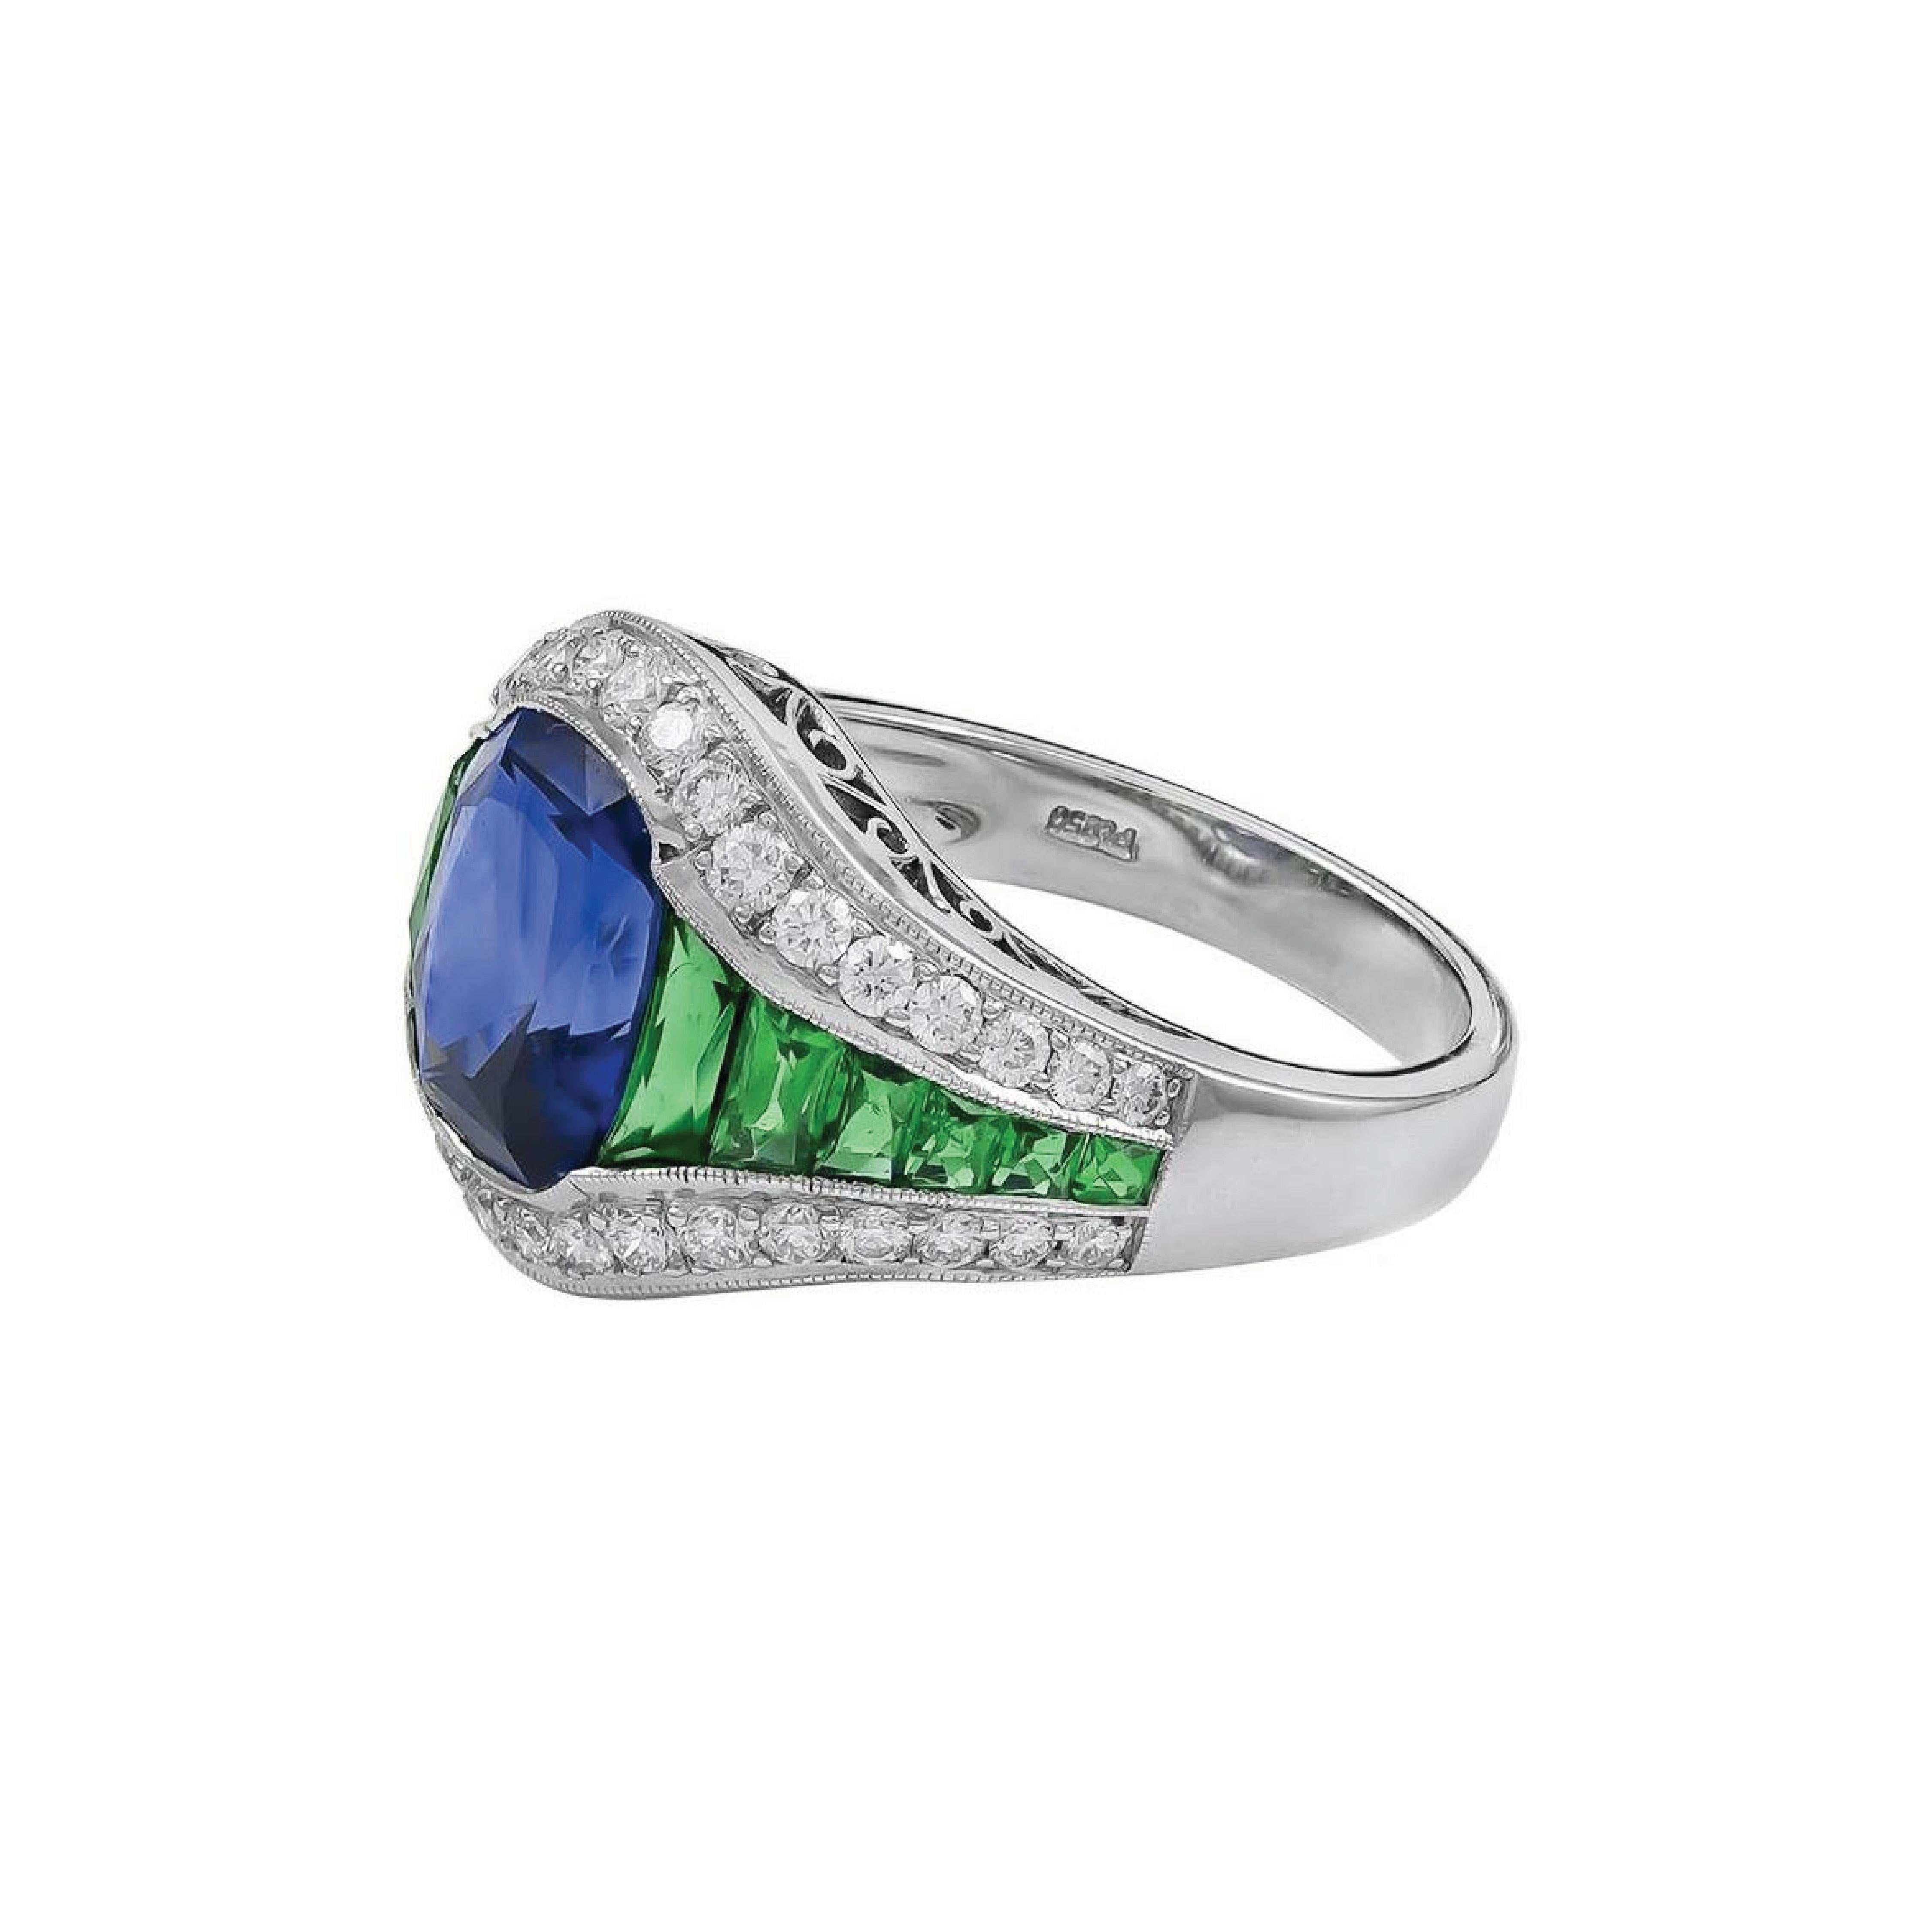 Art Deco inspired ring set in platinum that features 0.60 carats of emeralds, 0.45 carats of diamonds and GIA Certified 5.03 carats of Cushion Cut Sapphire Center 

Sophia D by Joseph Dardashti LTD has been known worldwide for 35 years and are